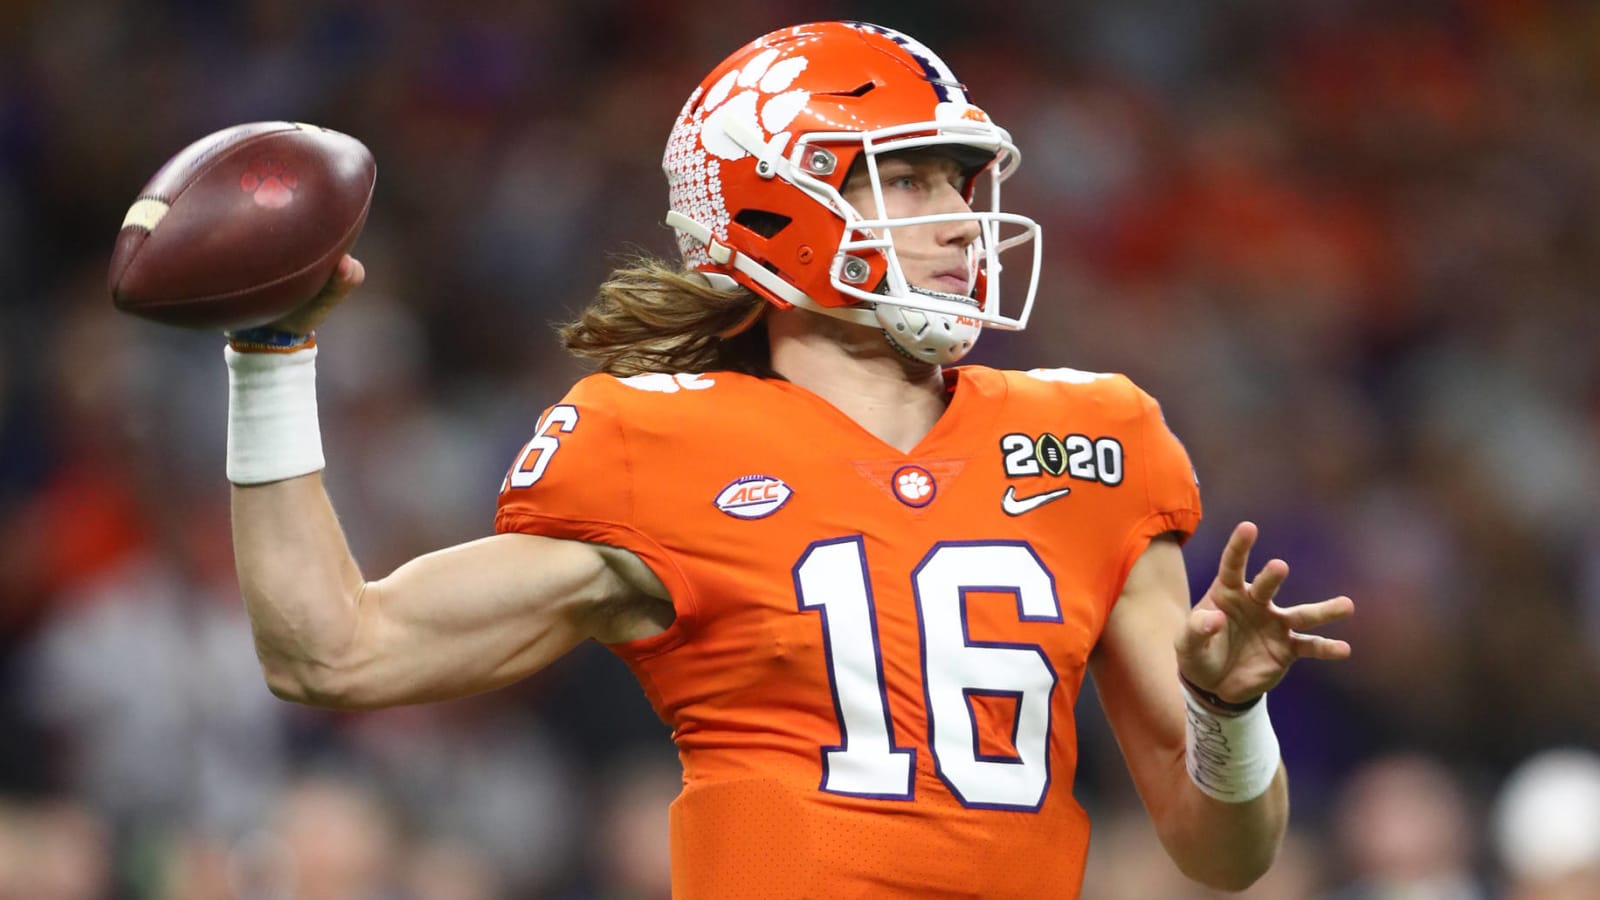 Trevor Lawrence won't play vs. Notre Dame due to COVID-19